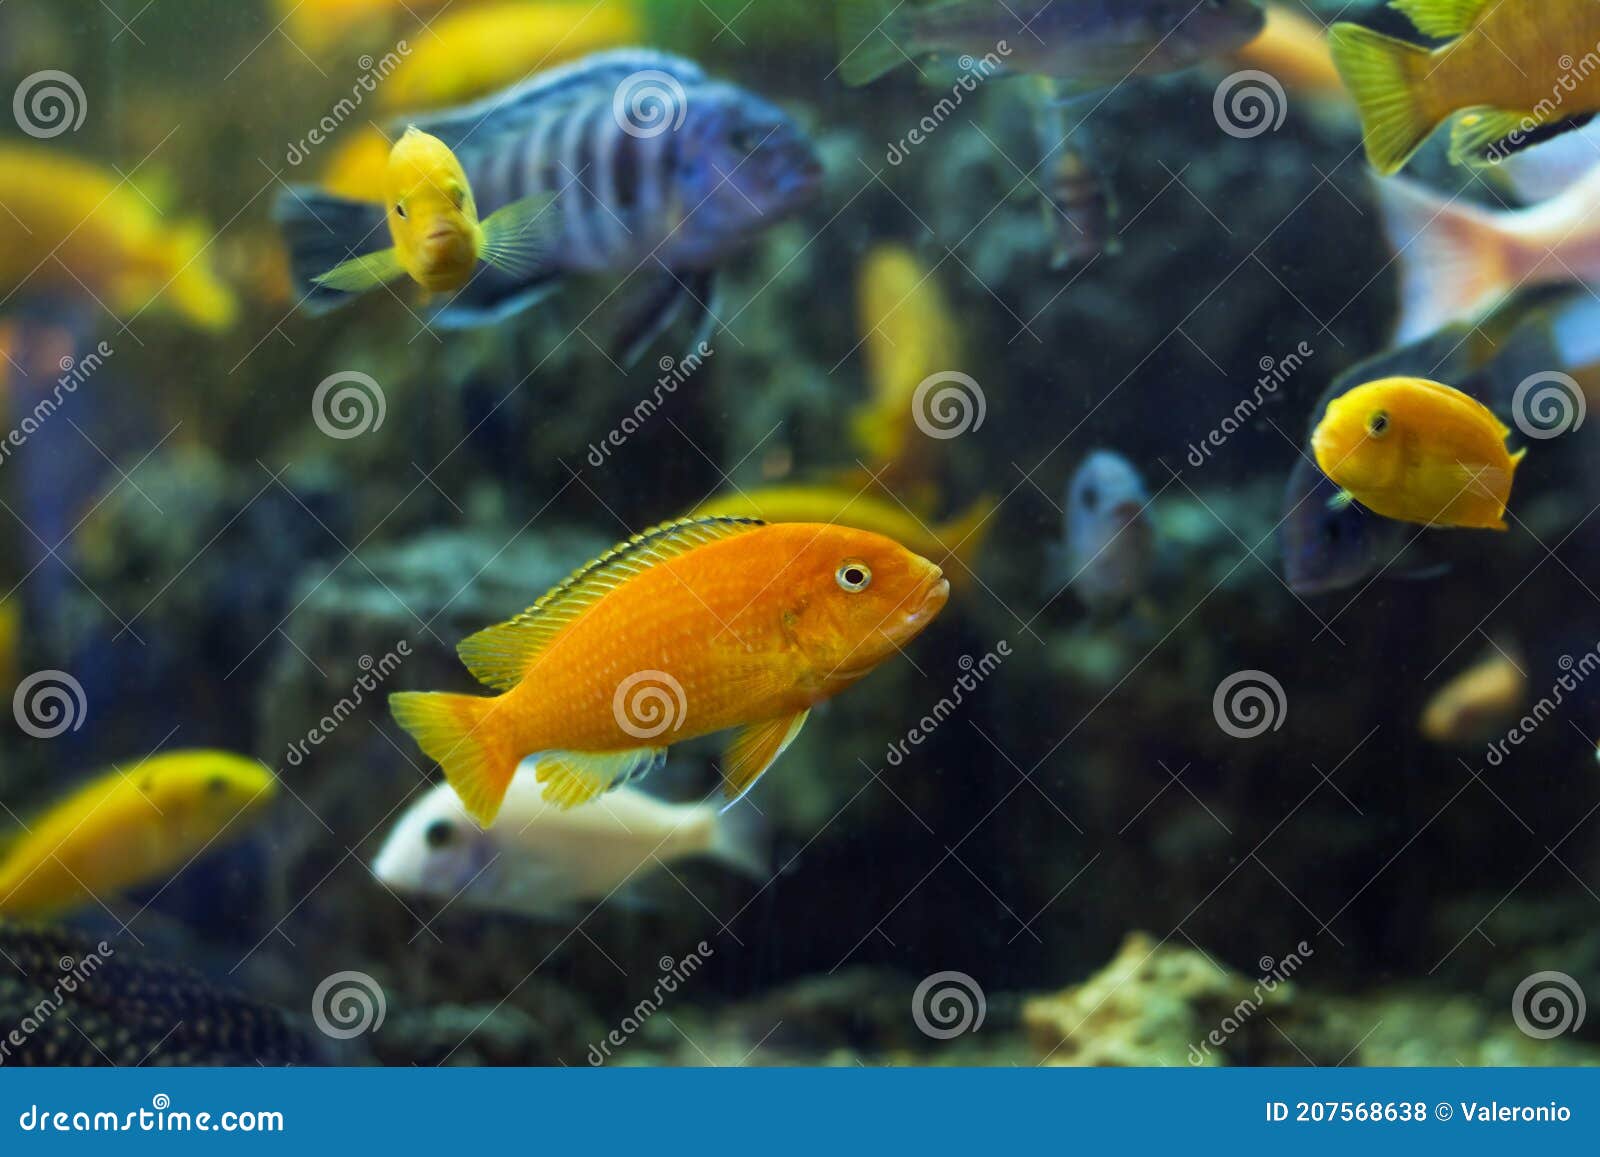 Aggressive Mbuna Cichlids from African Rift Lake Malawi, Different Age and Color in Community Aqua Stock Photo - Image of bright: 207568638